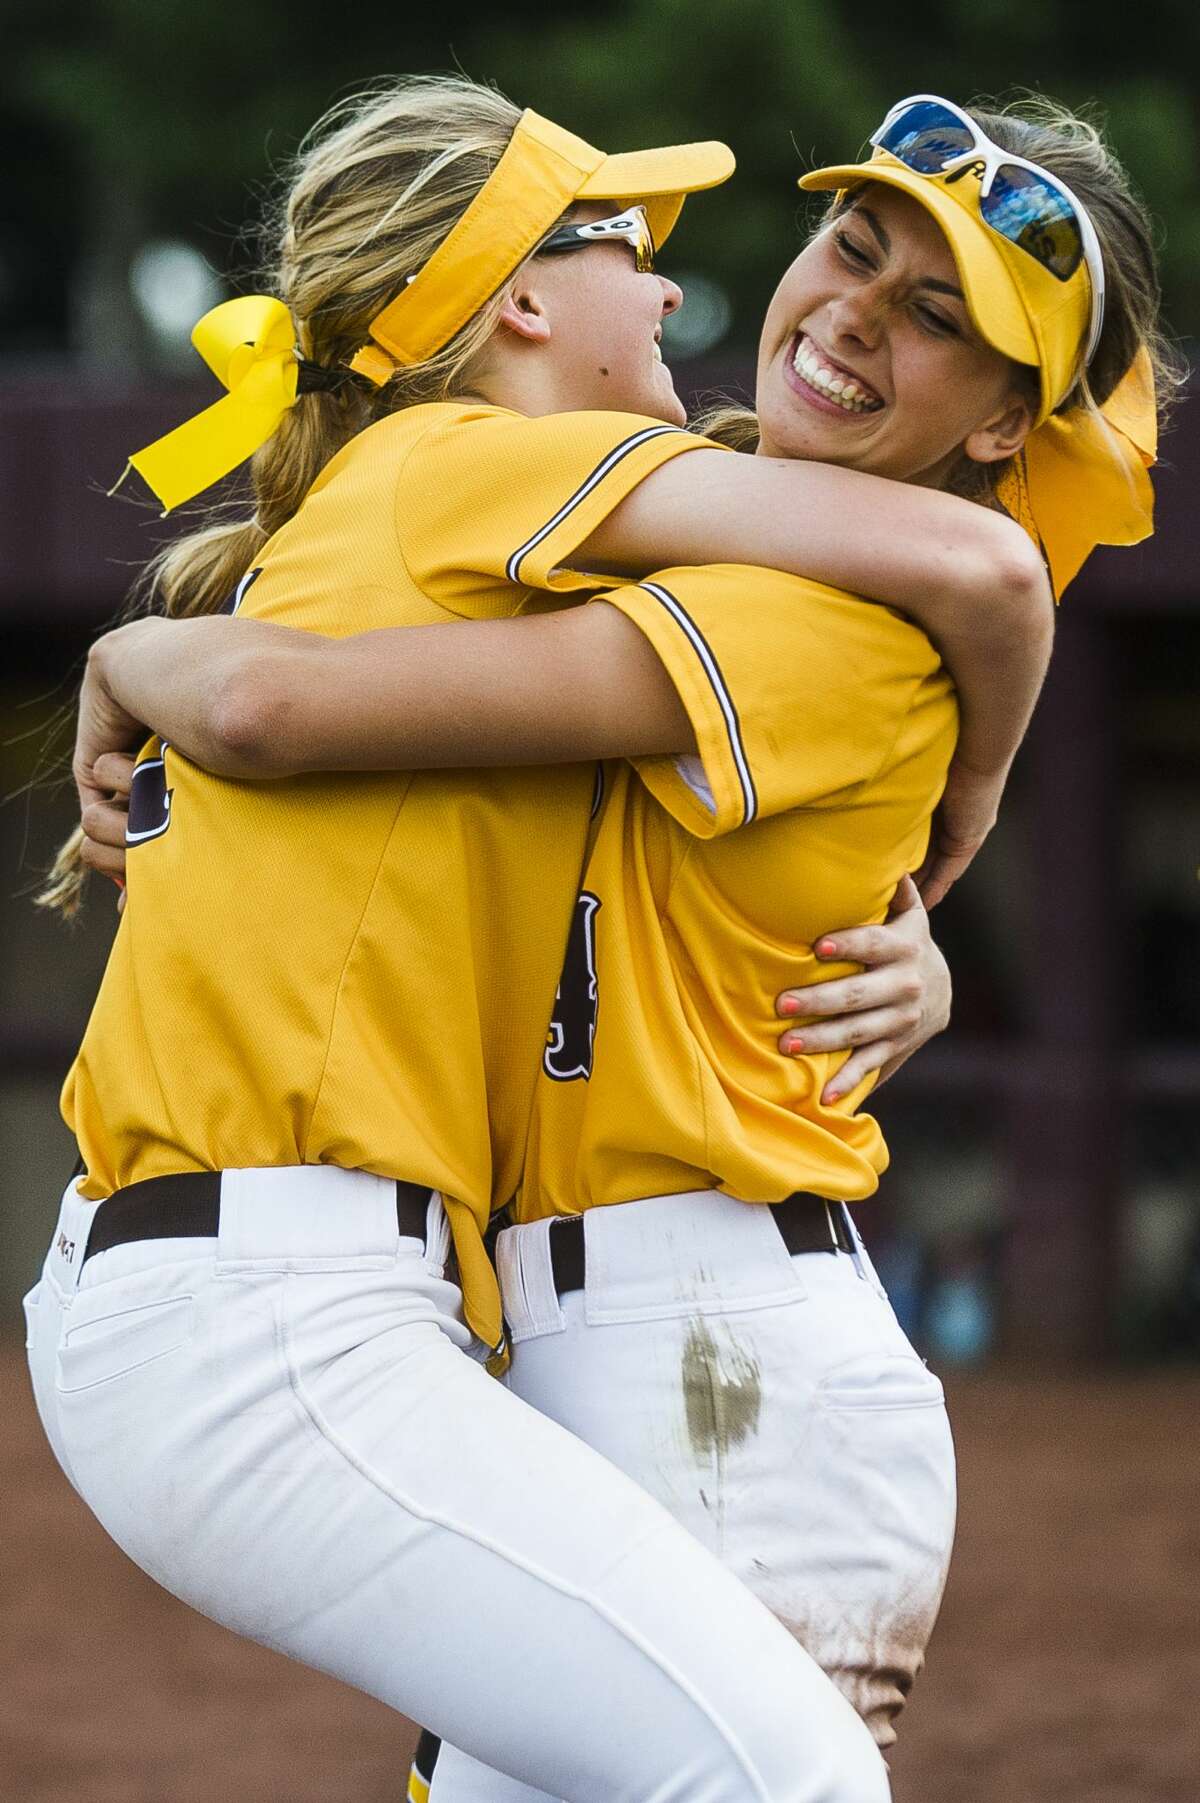 Bay City Western players celebrate after their Division 1 state quarterfinals victory over Lowell on Tuesday, June 11, 2019 at Central Michigan University. (Katy Kildee/kkildee@mdn.net)